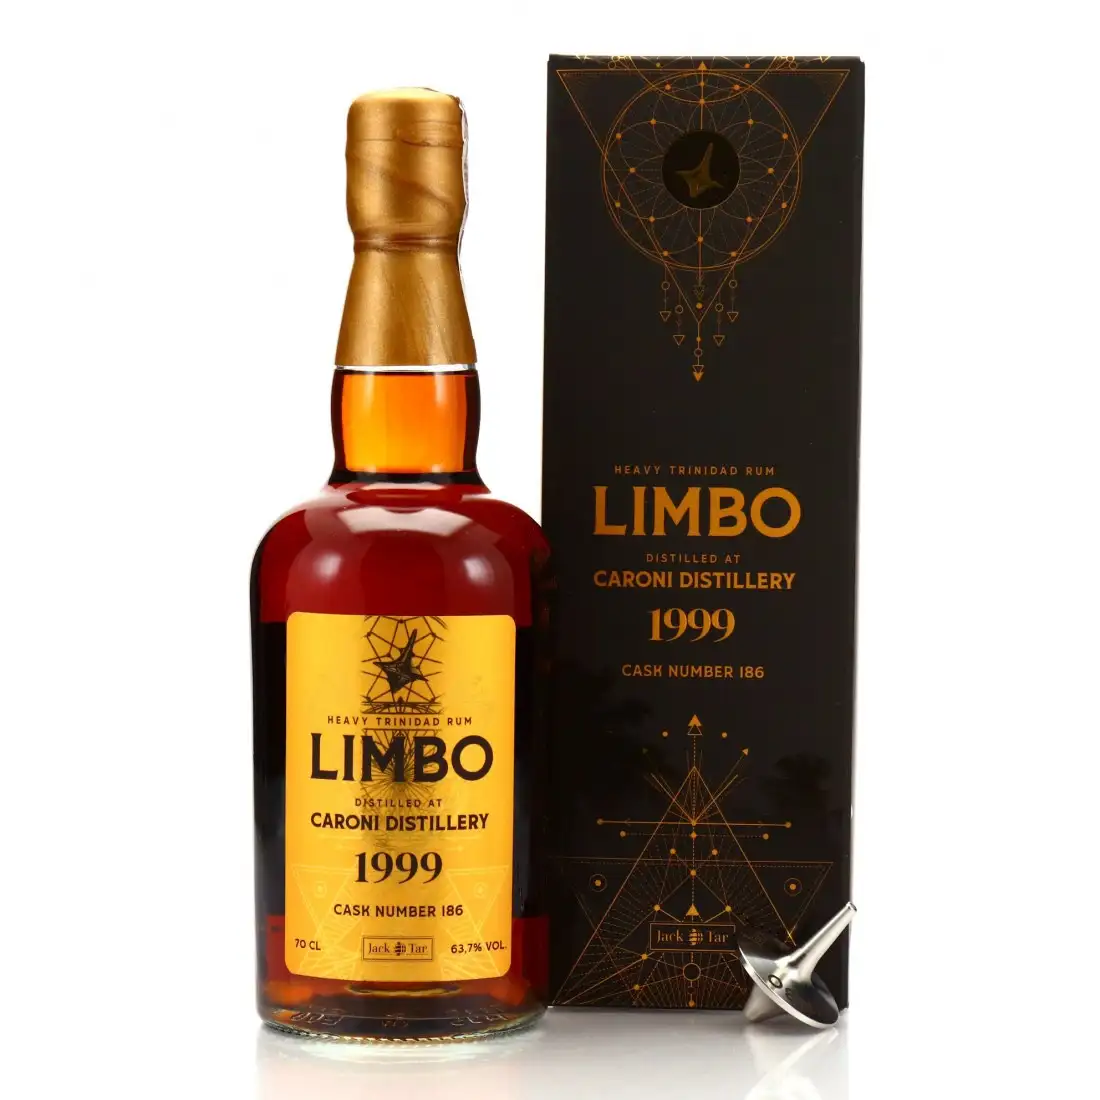 Image of the front of the bottle of the rum LIMBO HTR